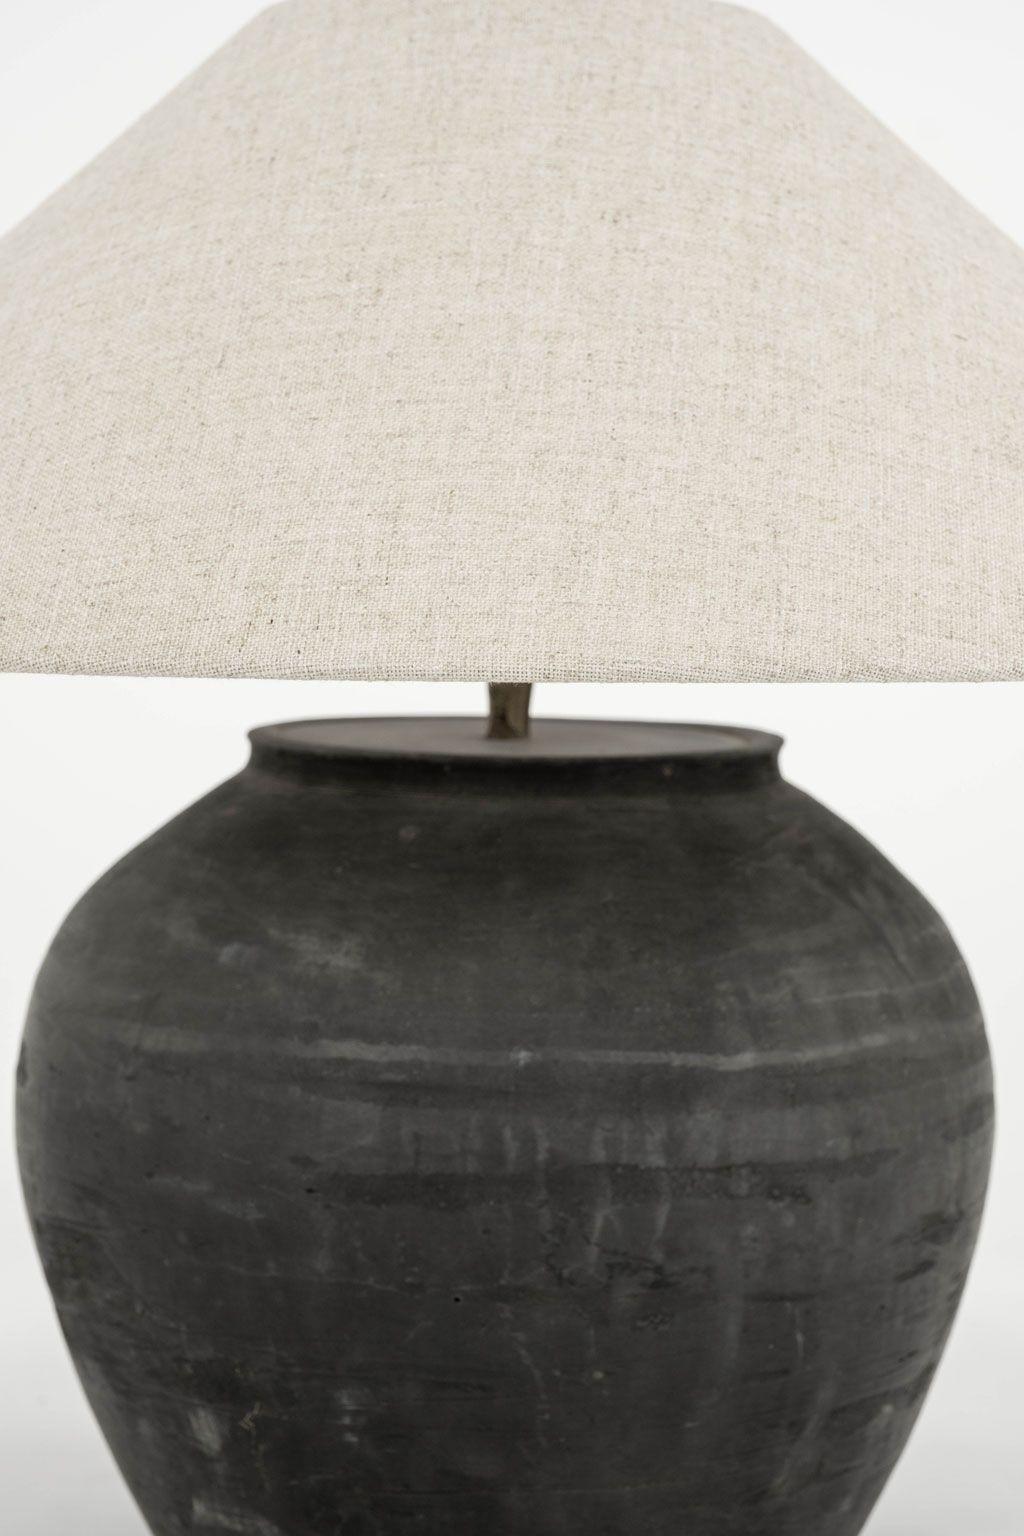 Matte black unglazed lamp with natural-color linen coolie shade (listed measurements include shade). Hand-made ceramic jar, newly wired (for use within the USA) as table lamp. Two available and sold individually, priced $2,600 each.

Measures 17.5